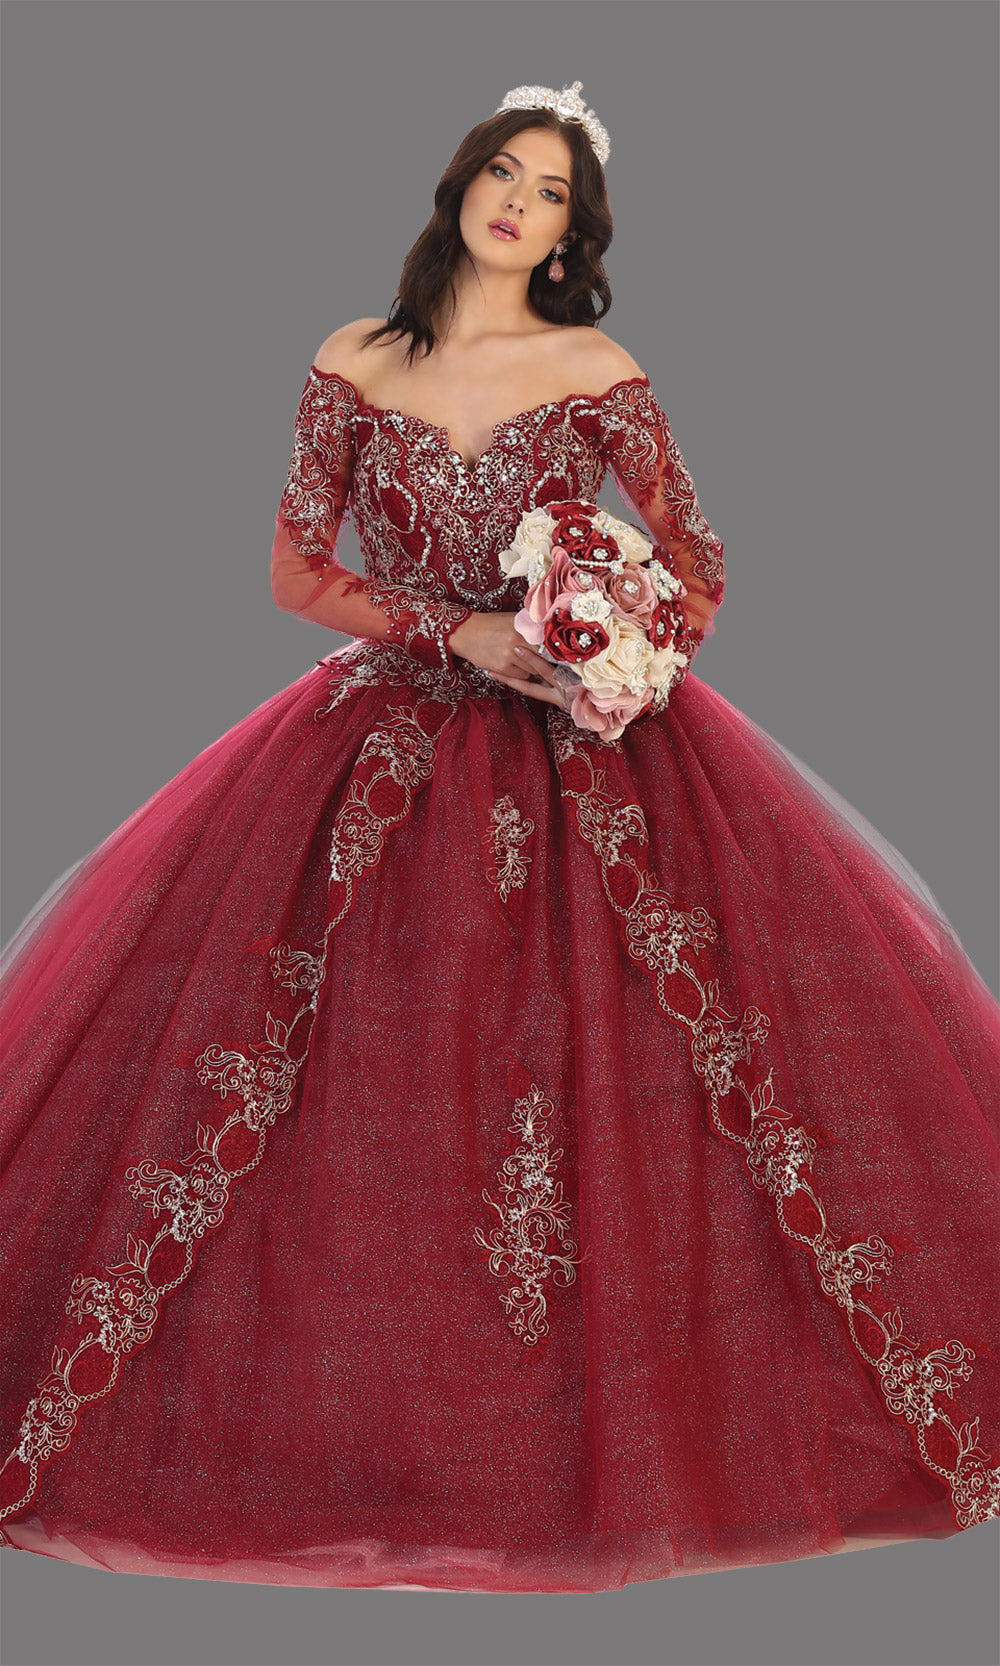 Mayqueen LK135 burgundy quinceanera off shoulder & long sleeves ball gown. Dark red sequin ball gown is perfect for engagement dress, wedding reception, indowestern party gown, sweet 16, debut, sweet 15, sweet 18. Plus sizes available for ballgowns.jpg